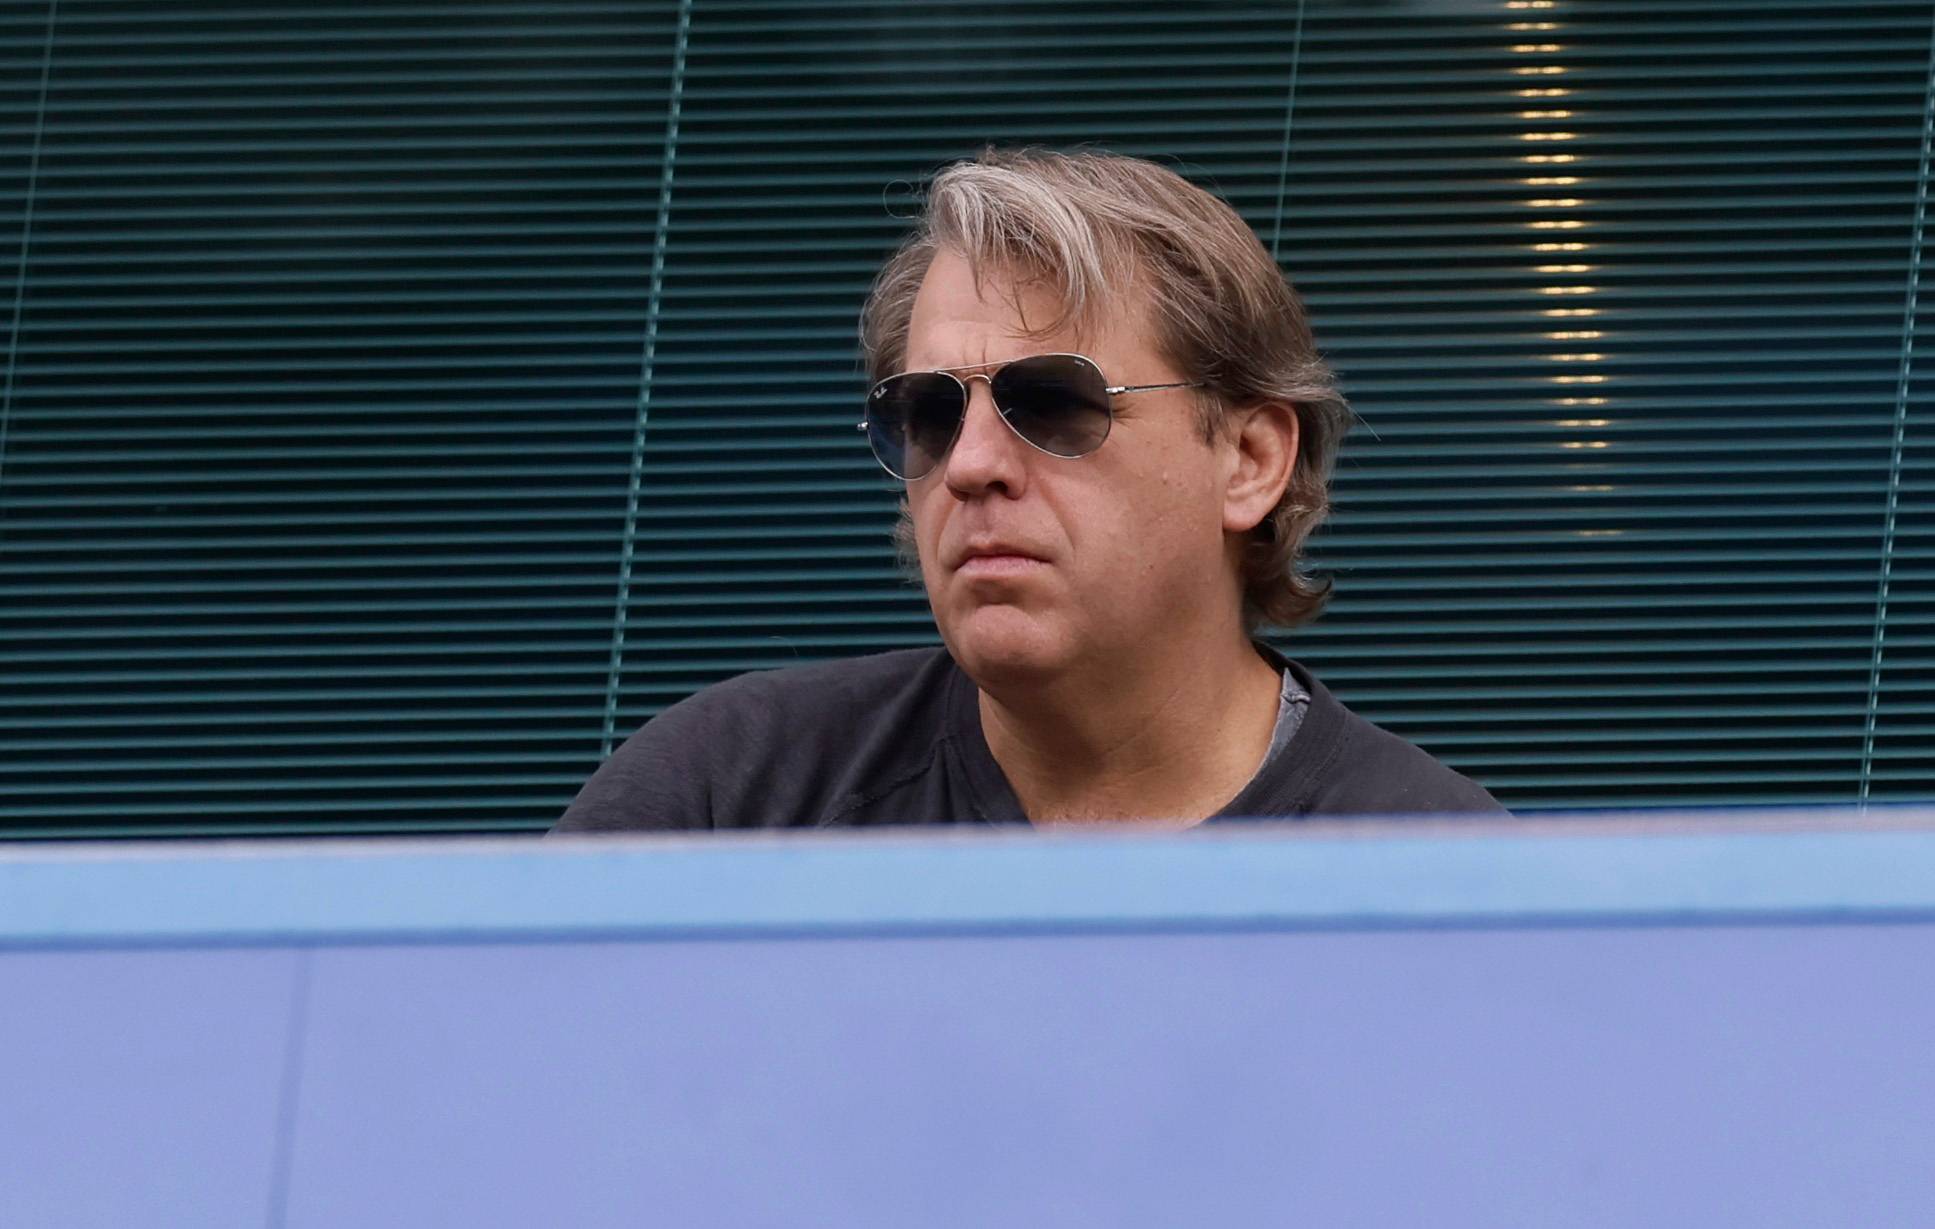 Chelsea co-owner Todd Boehly